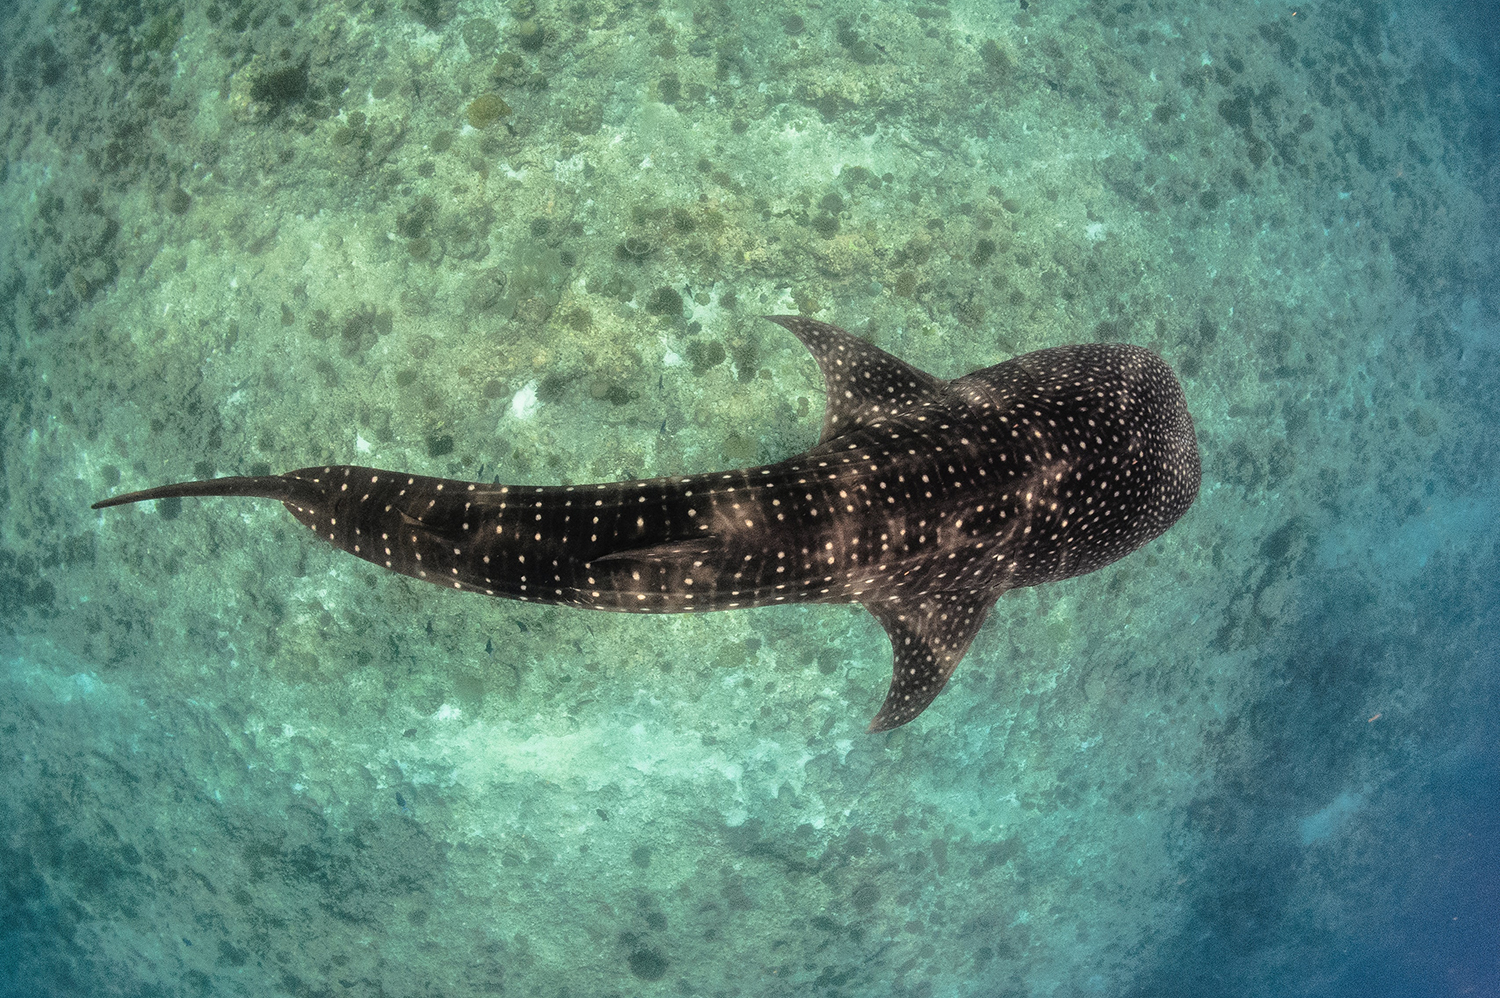 https://www.caboprivateguide.com/wp-content/uploads/whale-shark-rhincodon-typus.jpg